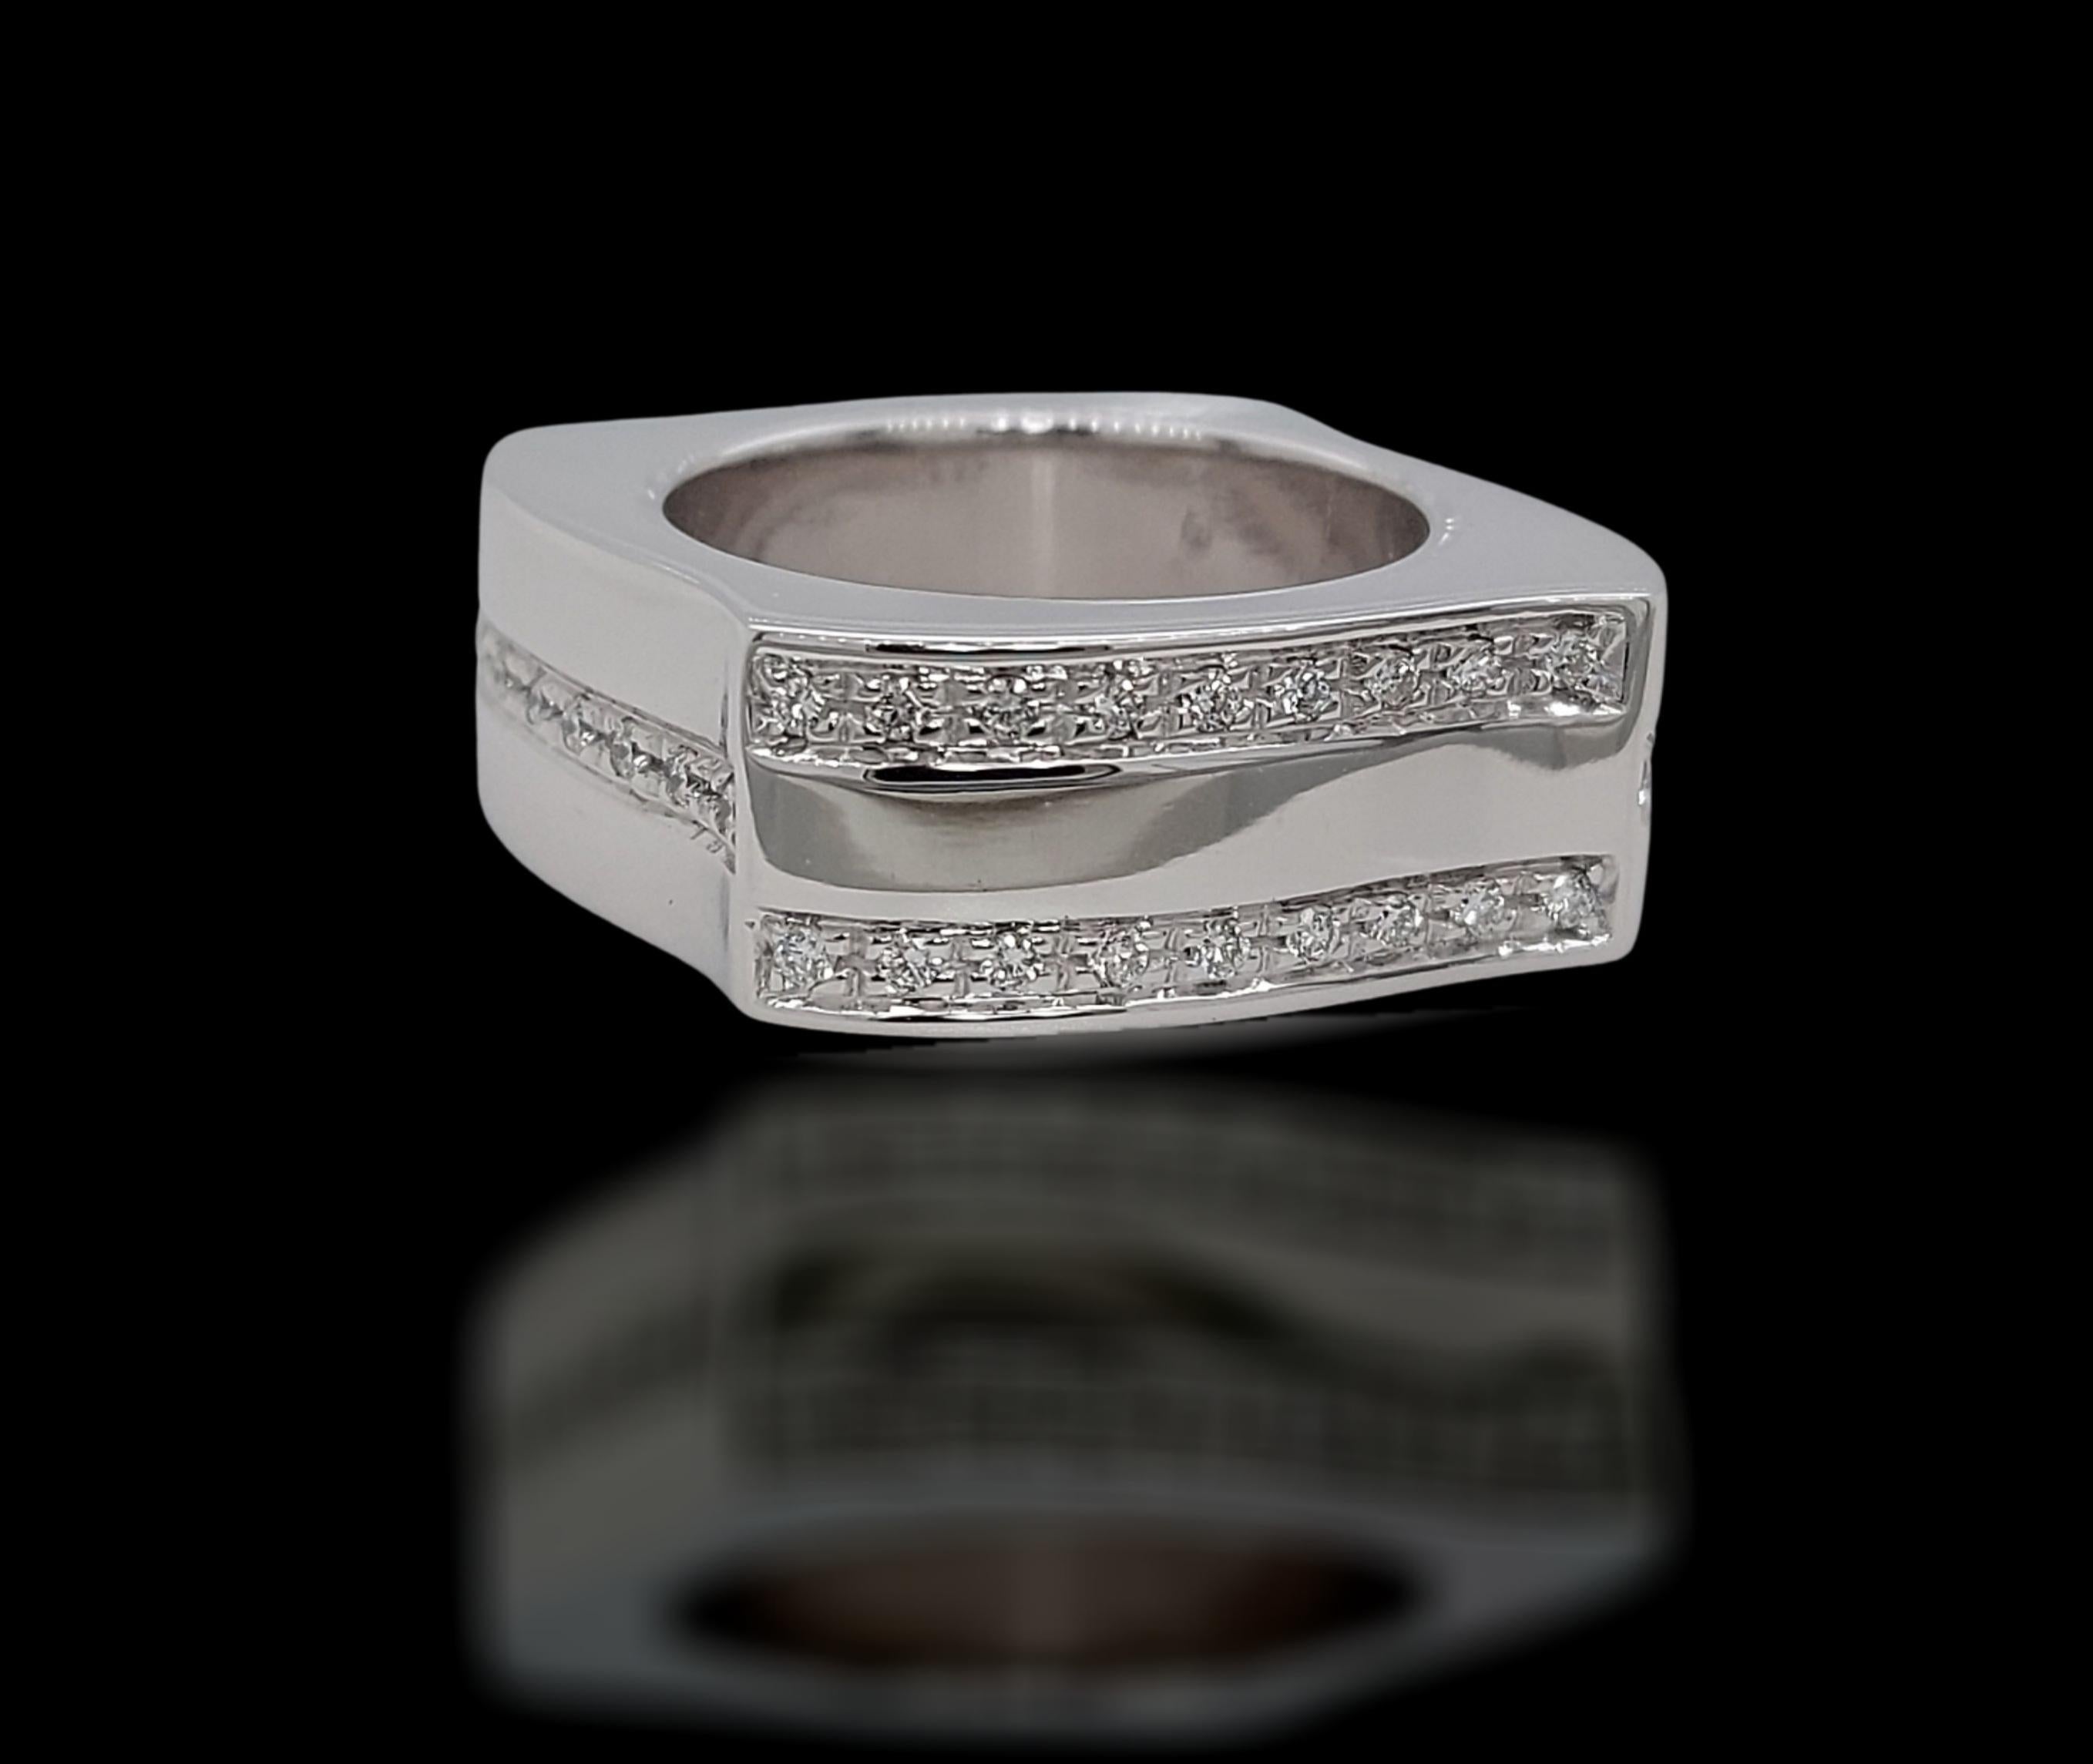 18kt White Gold Square, Wave Schroeder Joailliers Ring with Diamonds

Diamonds: 42 Diamonds, together 0.63ct

Material: 18kt solid White Gold

Ring size: 54.4 EU / 7US 

Total weight: 19 gram / 0.670 oz / 12.2 dwt